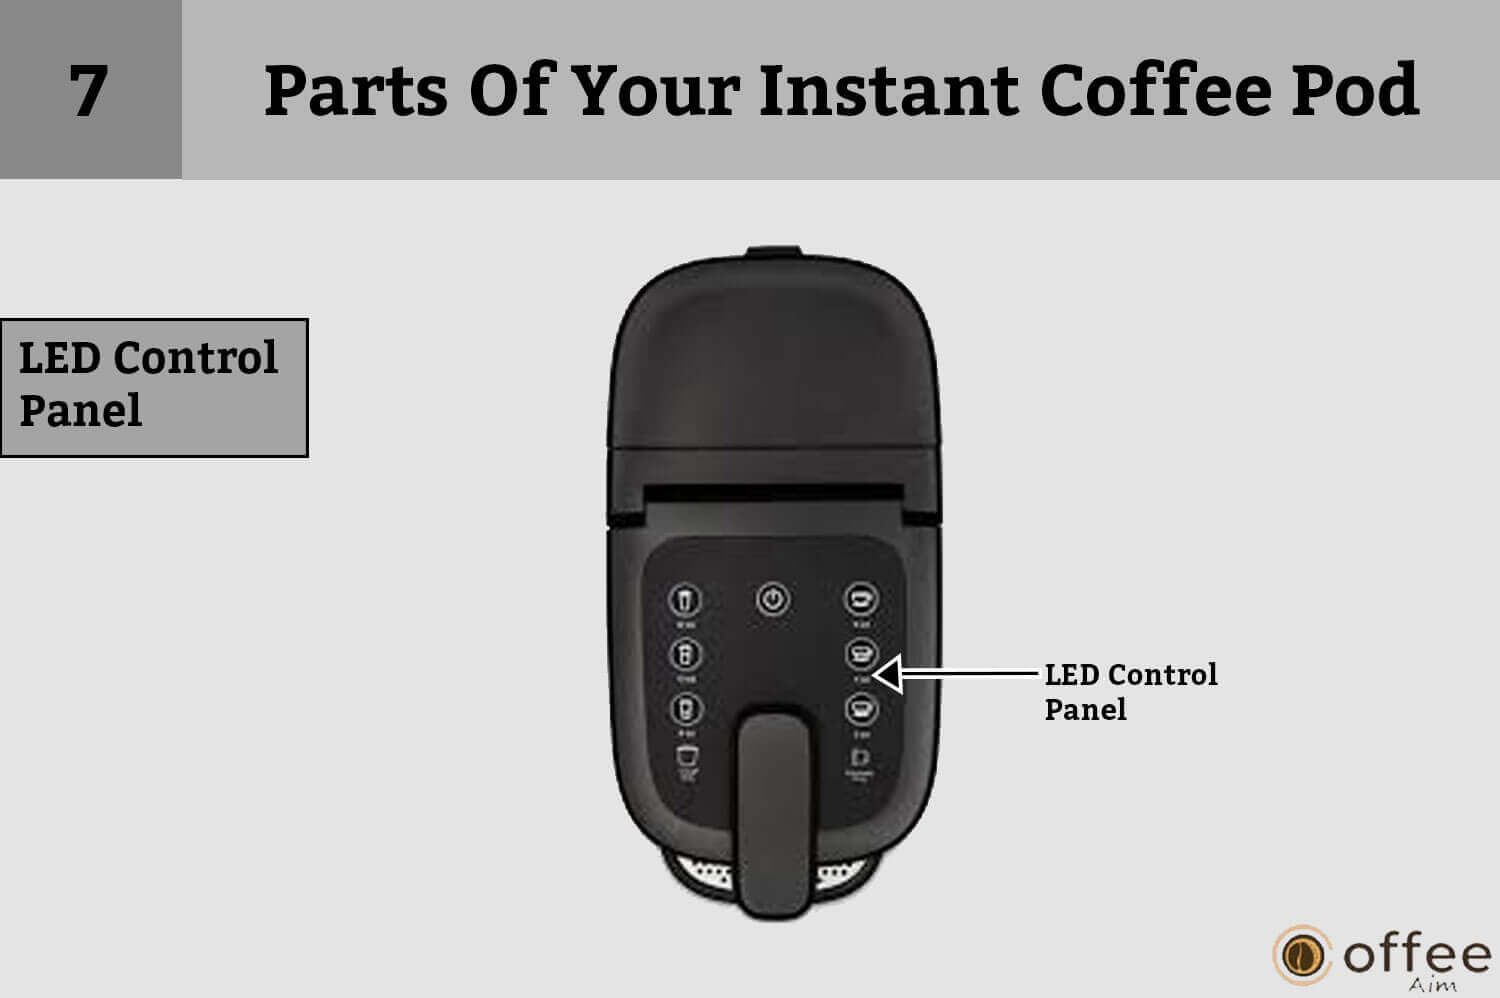 This image provides a visual representation of the "LED Control Panel" as part of our article on the "Parts Of Your Instant Coffee Pod: How to Connect Nespresso Vertuo Creatista Machine."